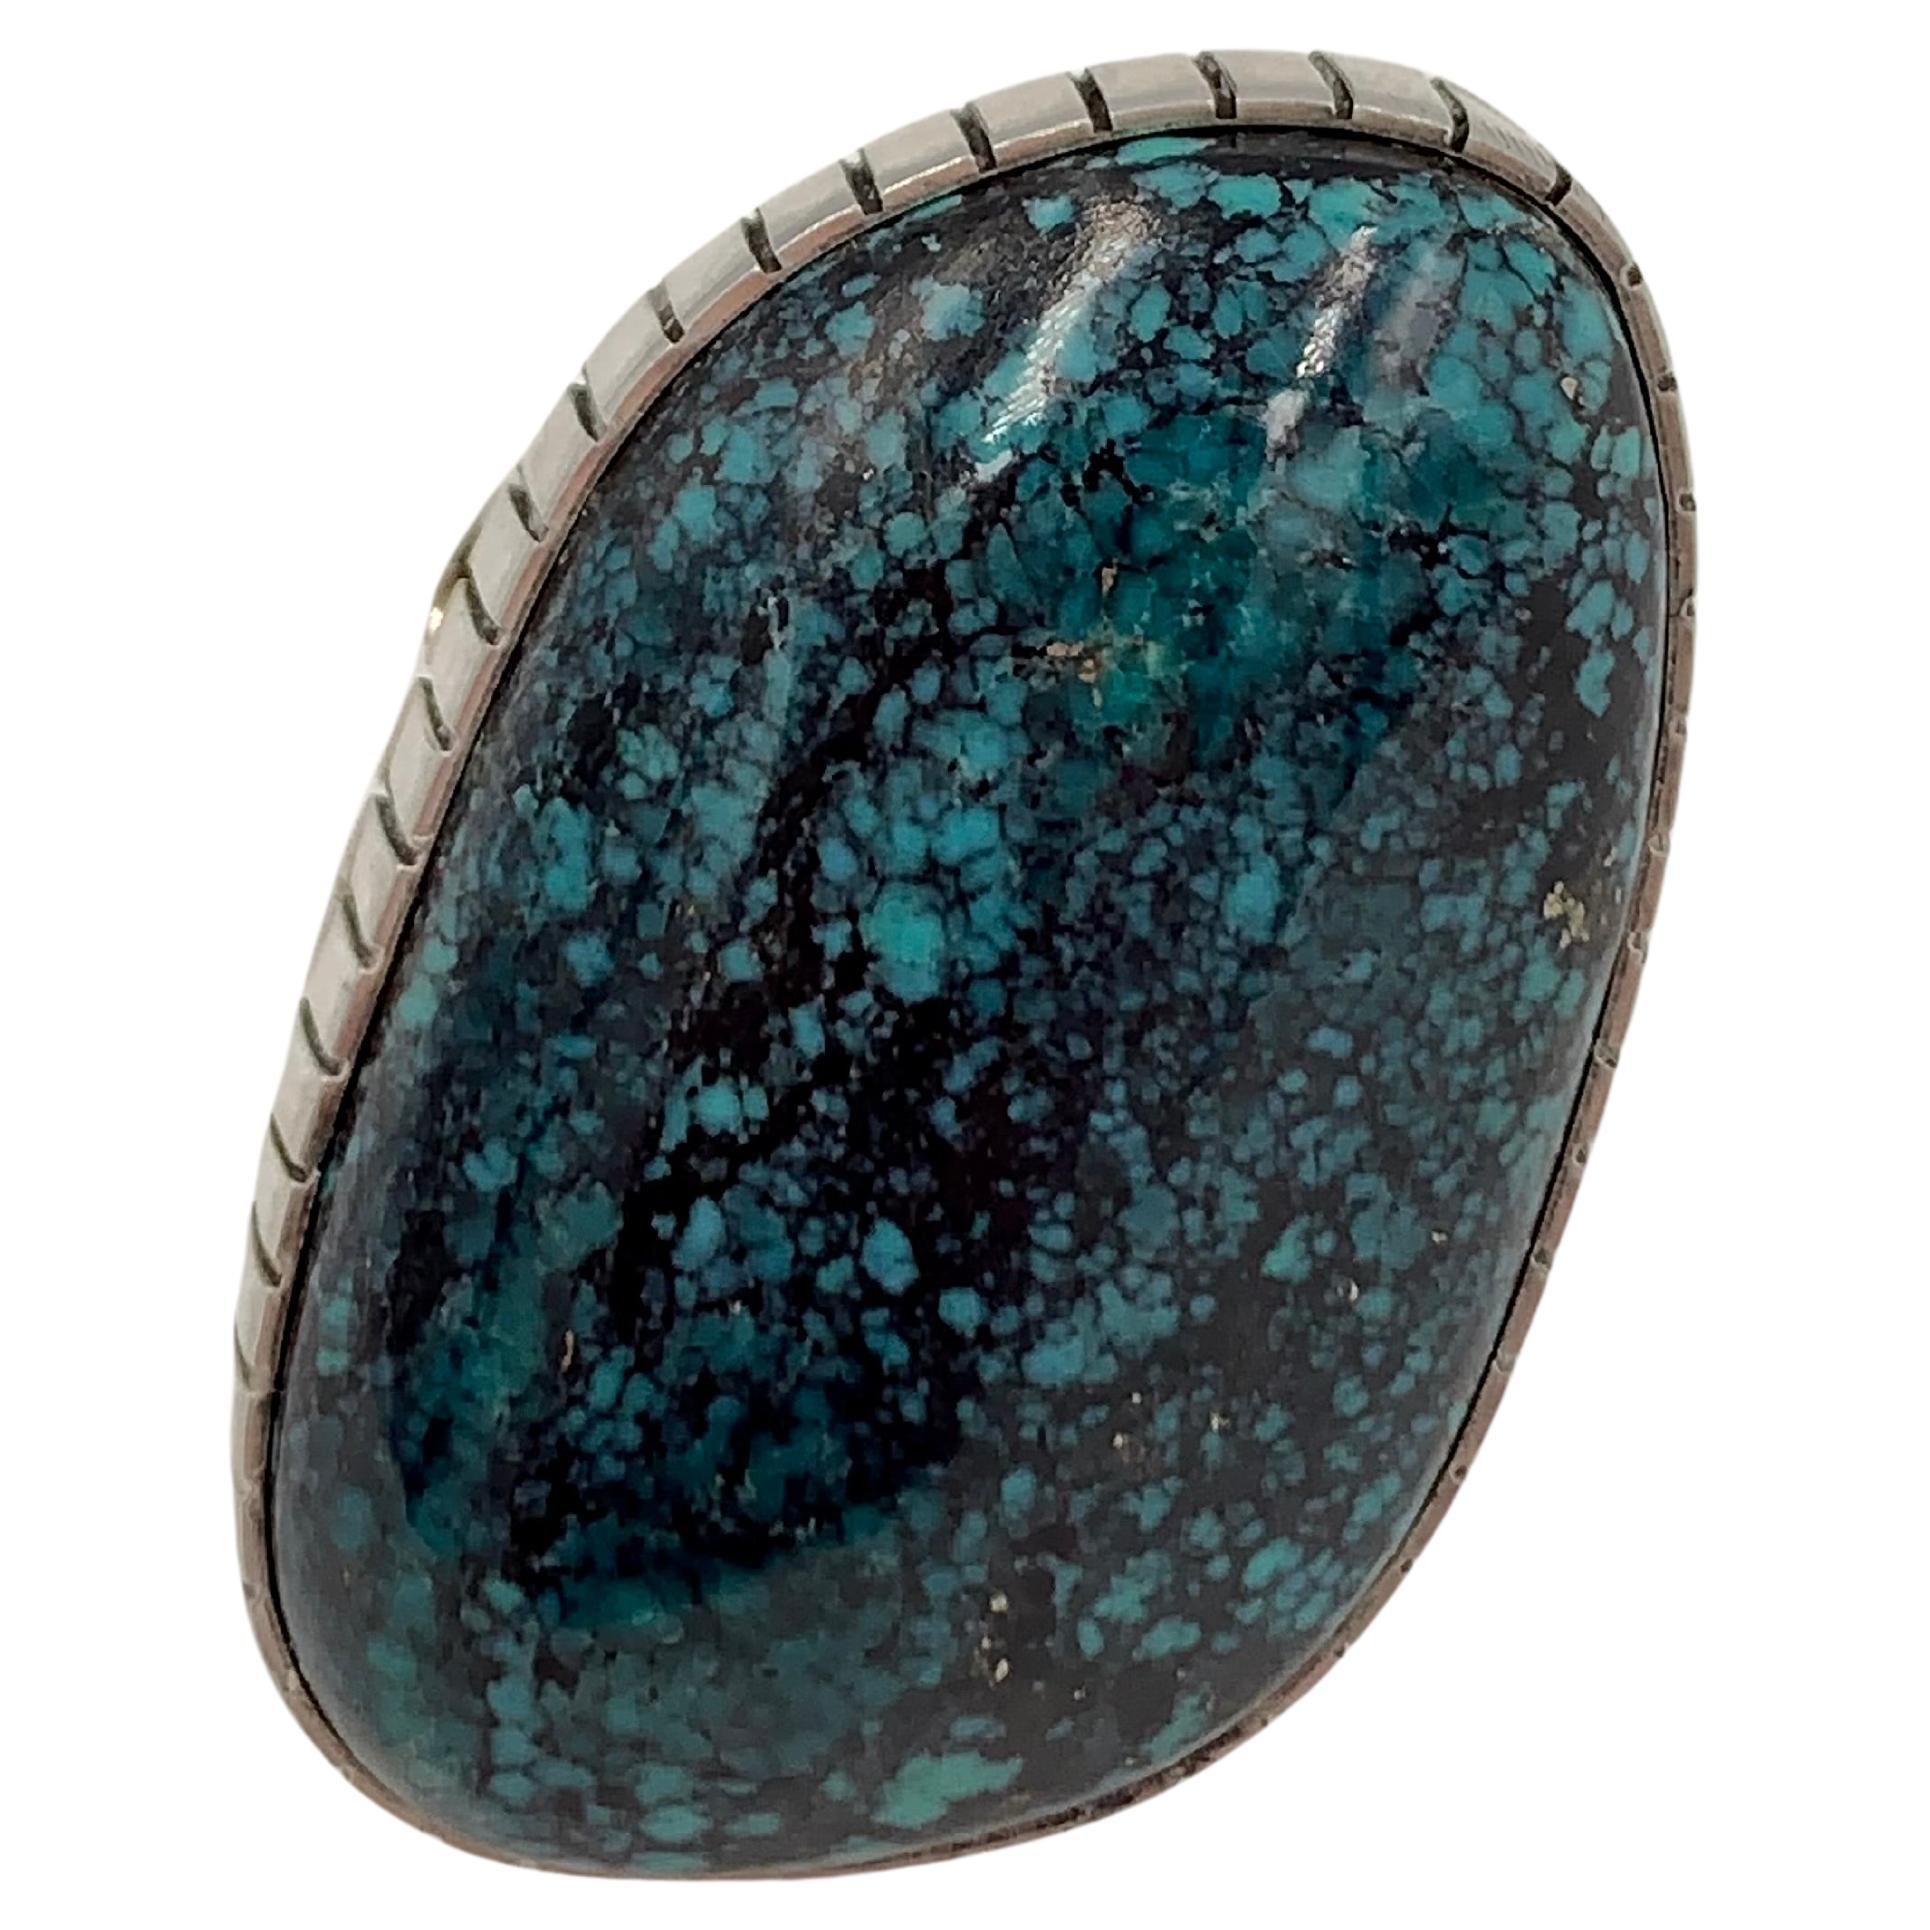 Old King’s Manassa Turquoise Sterling Silver Ring by Navajo Silversmith Alfred Lee.

Size: 8

The King's Manassa turquoise mine, or more accurately the 